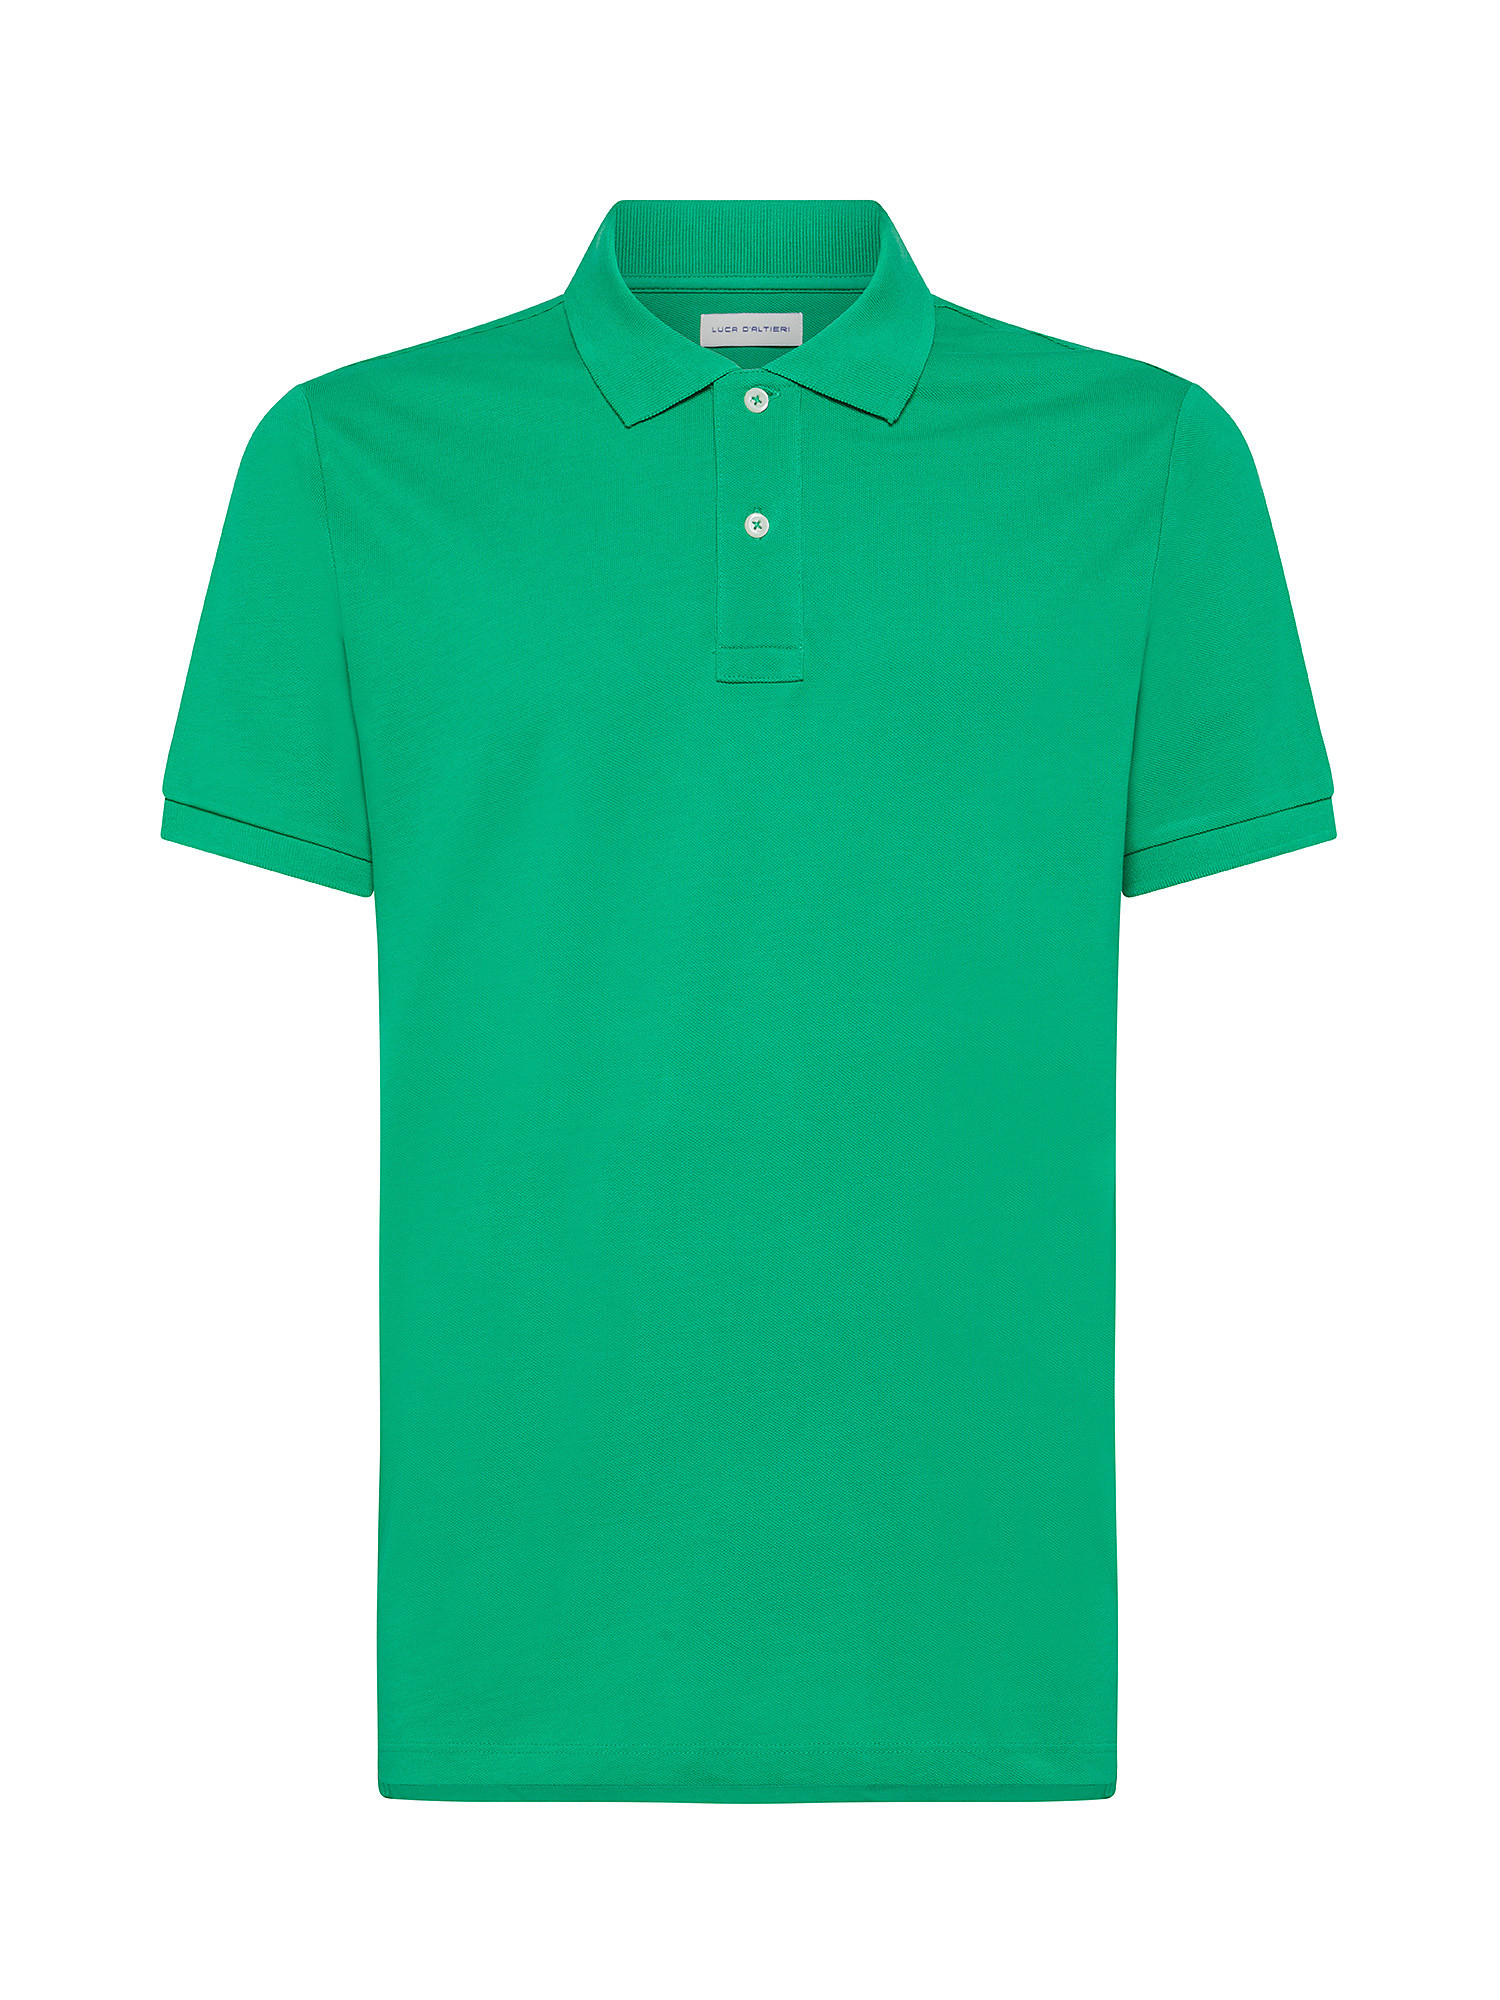 Luca D'Altieri - Polo in pure cotton, Green, large image number 0